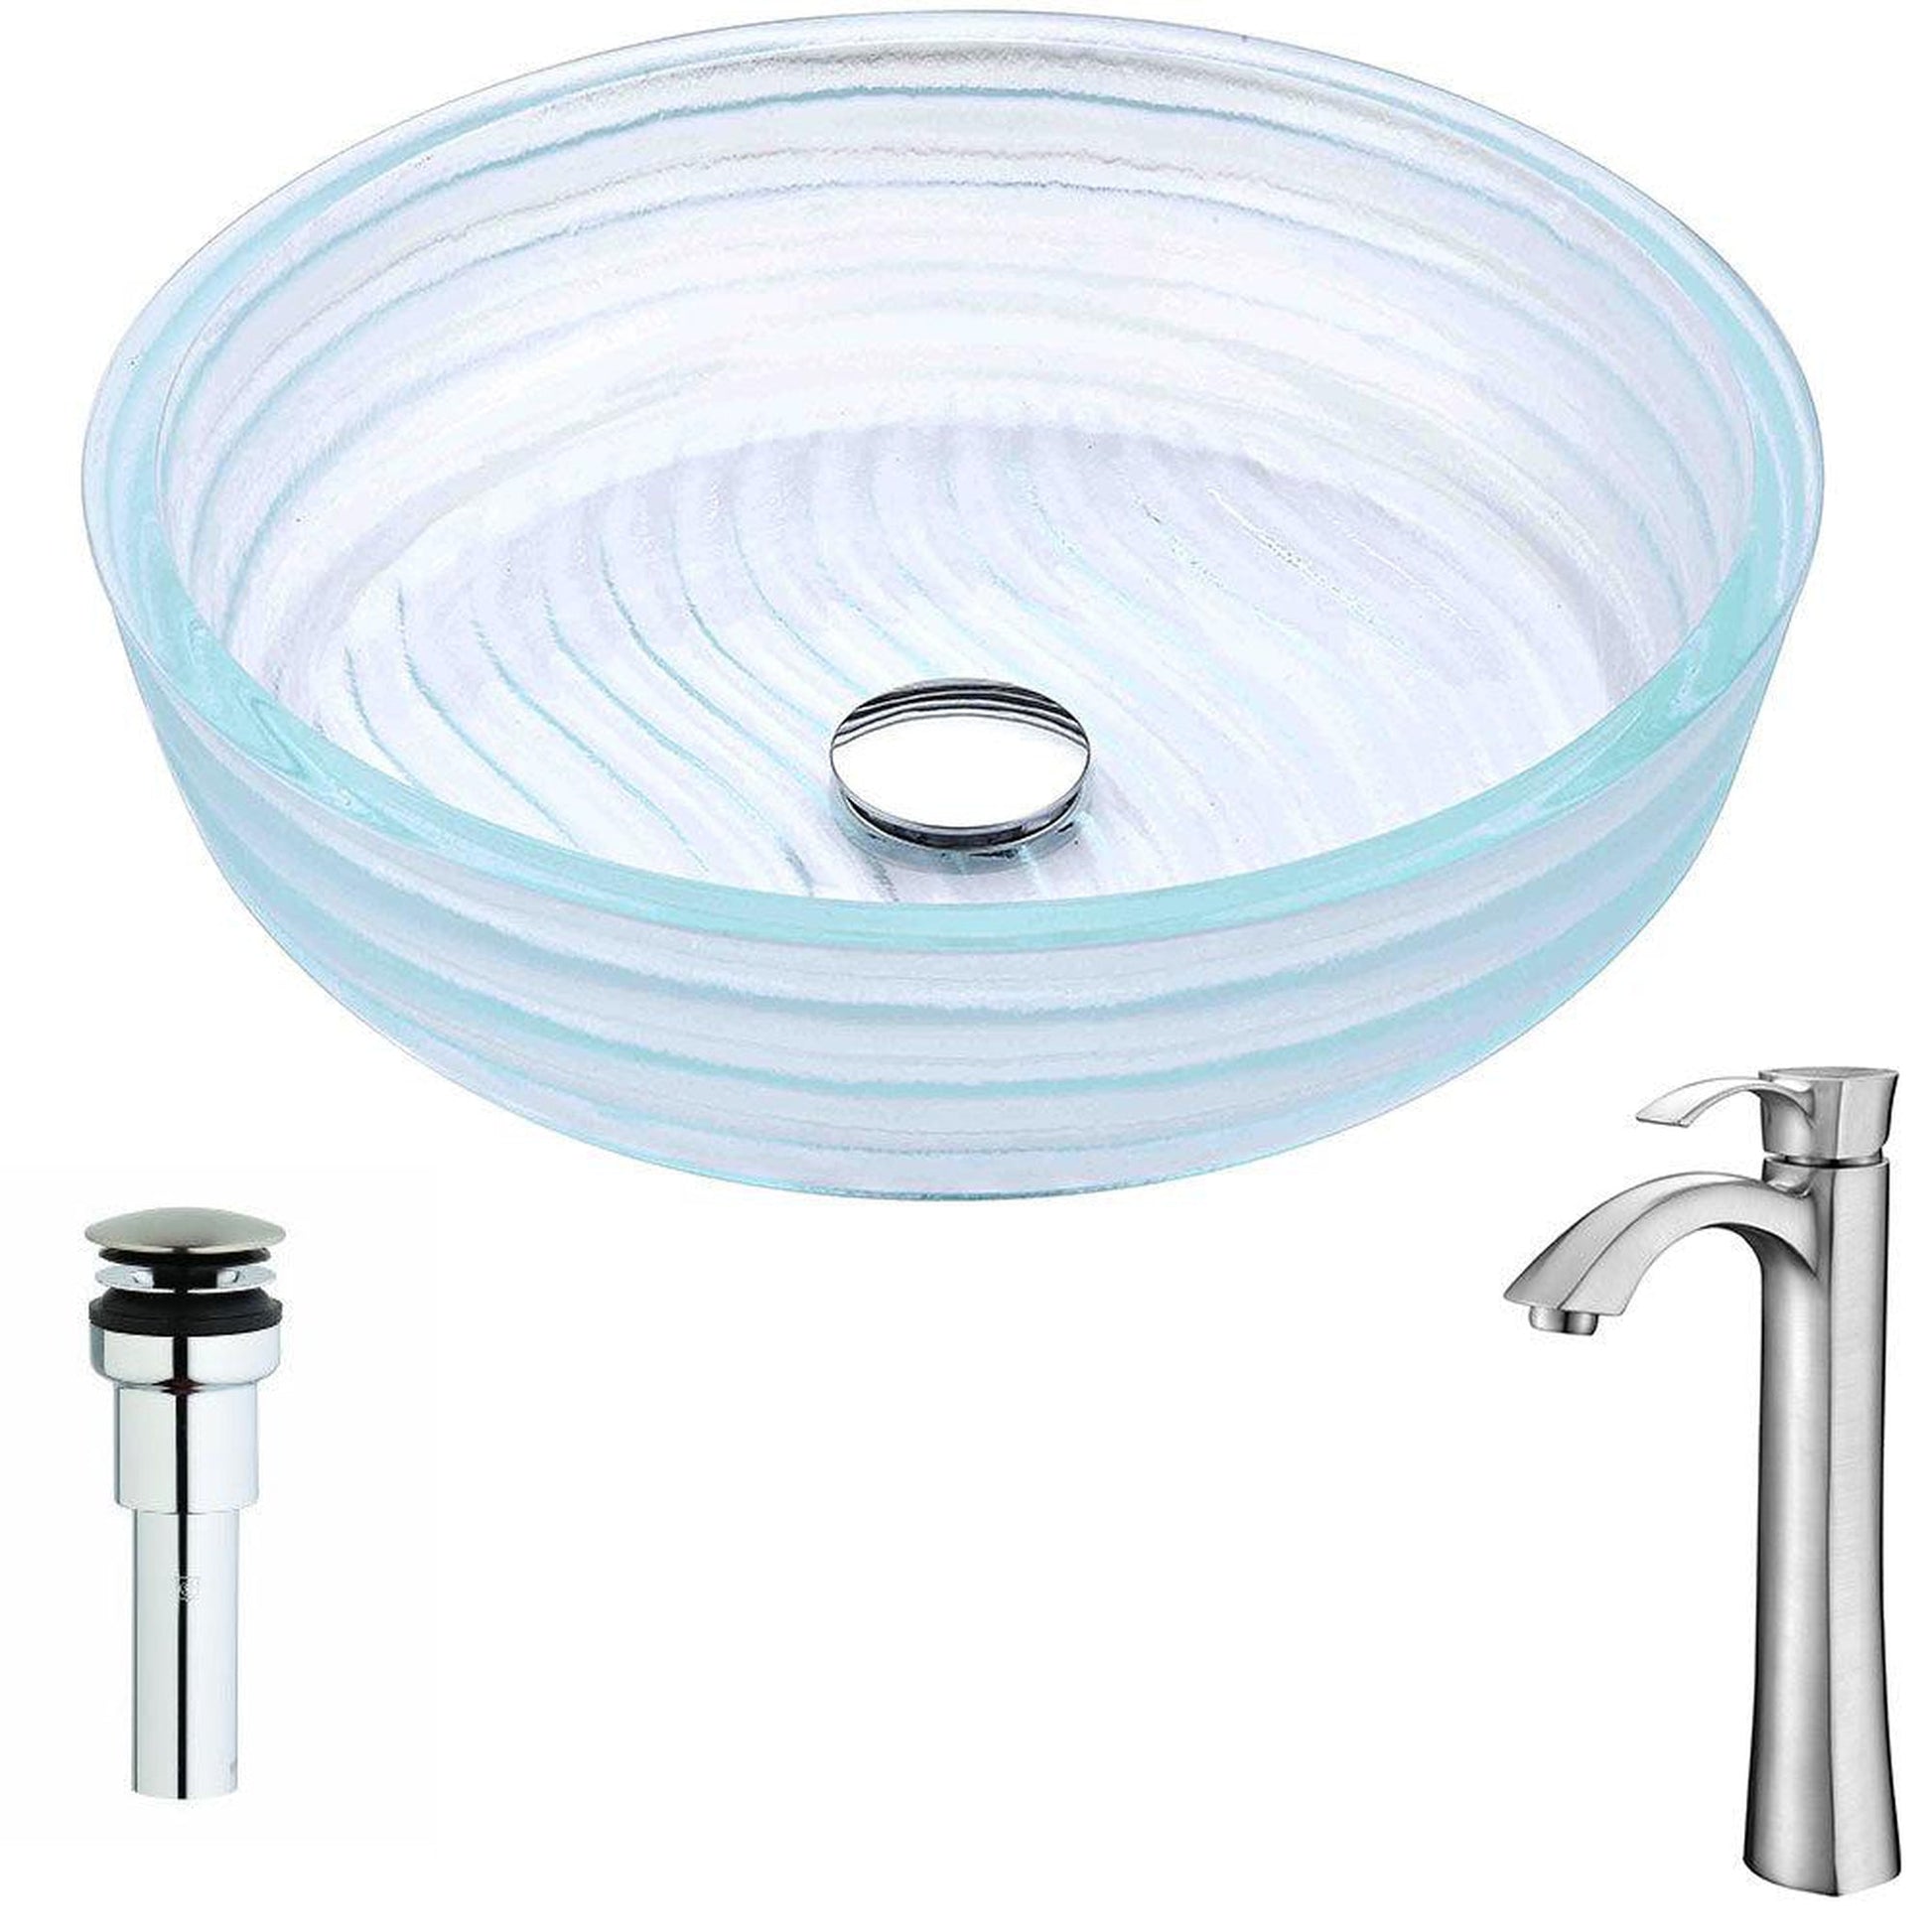 ANZZI Canta Series 17" x 17" Cylinder Shape Translucent Crystal Deco-Glass Vessel Sink With Chrome Pop-Up Drain and Brushed Nickel Fann Faucet